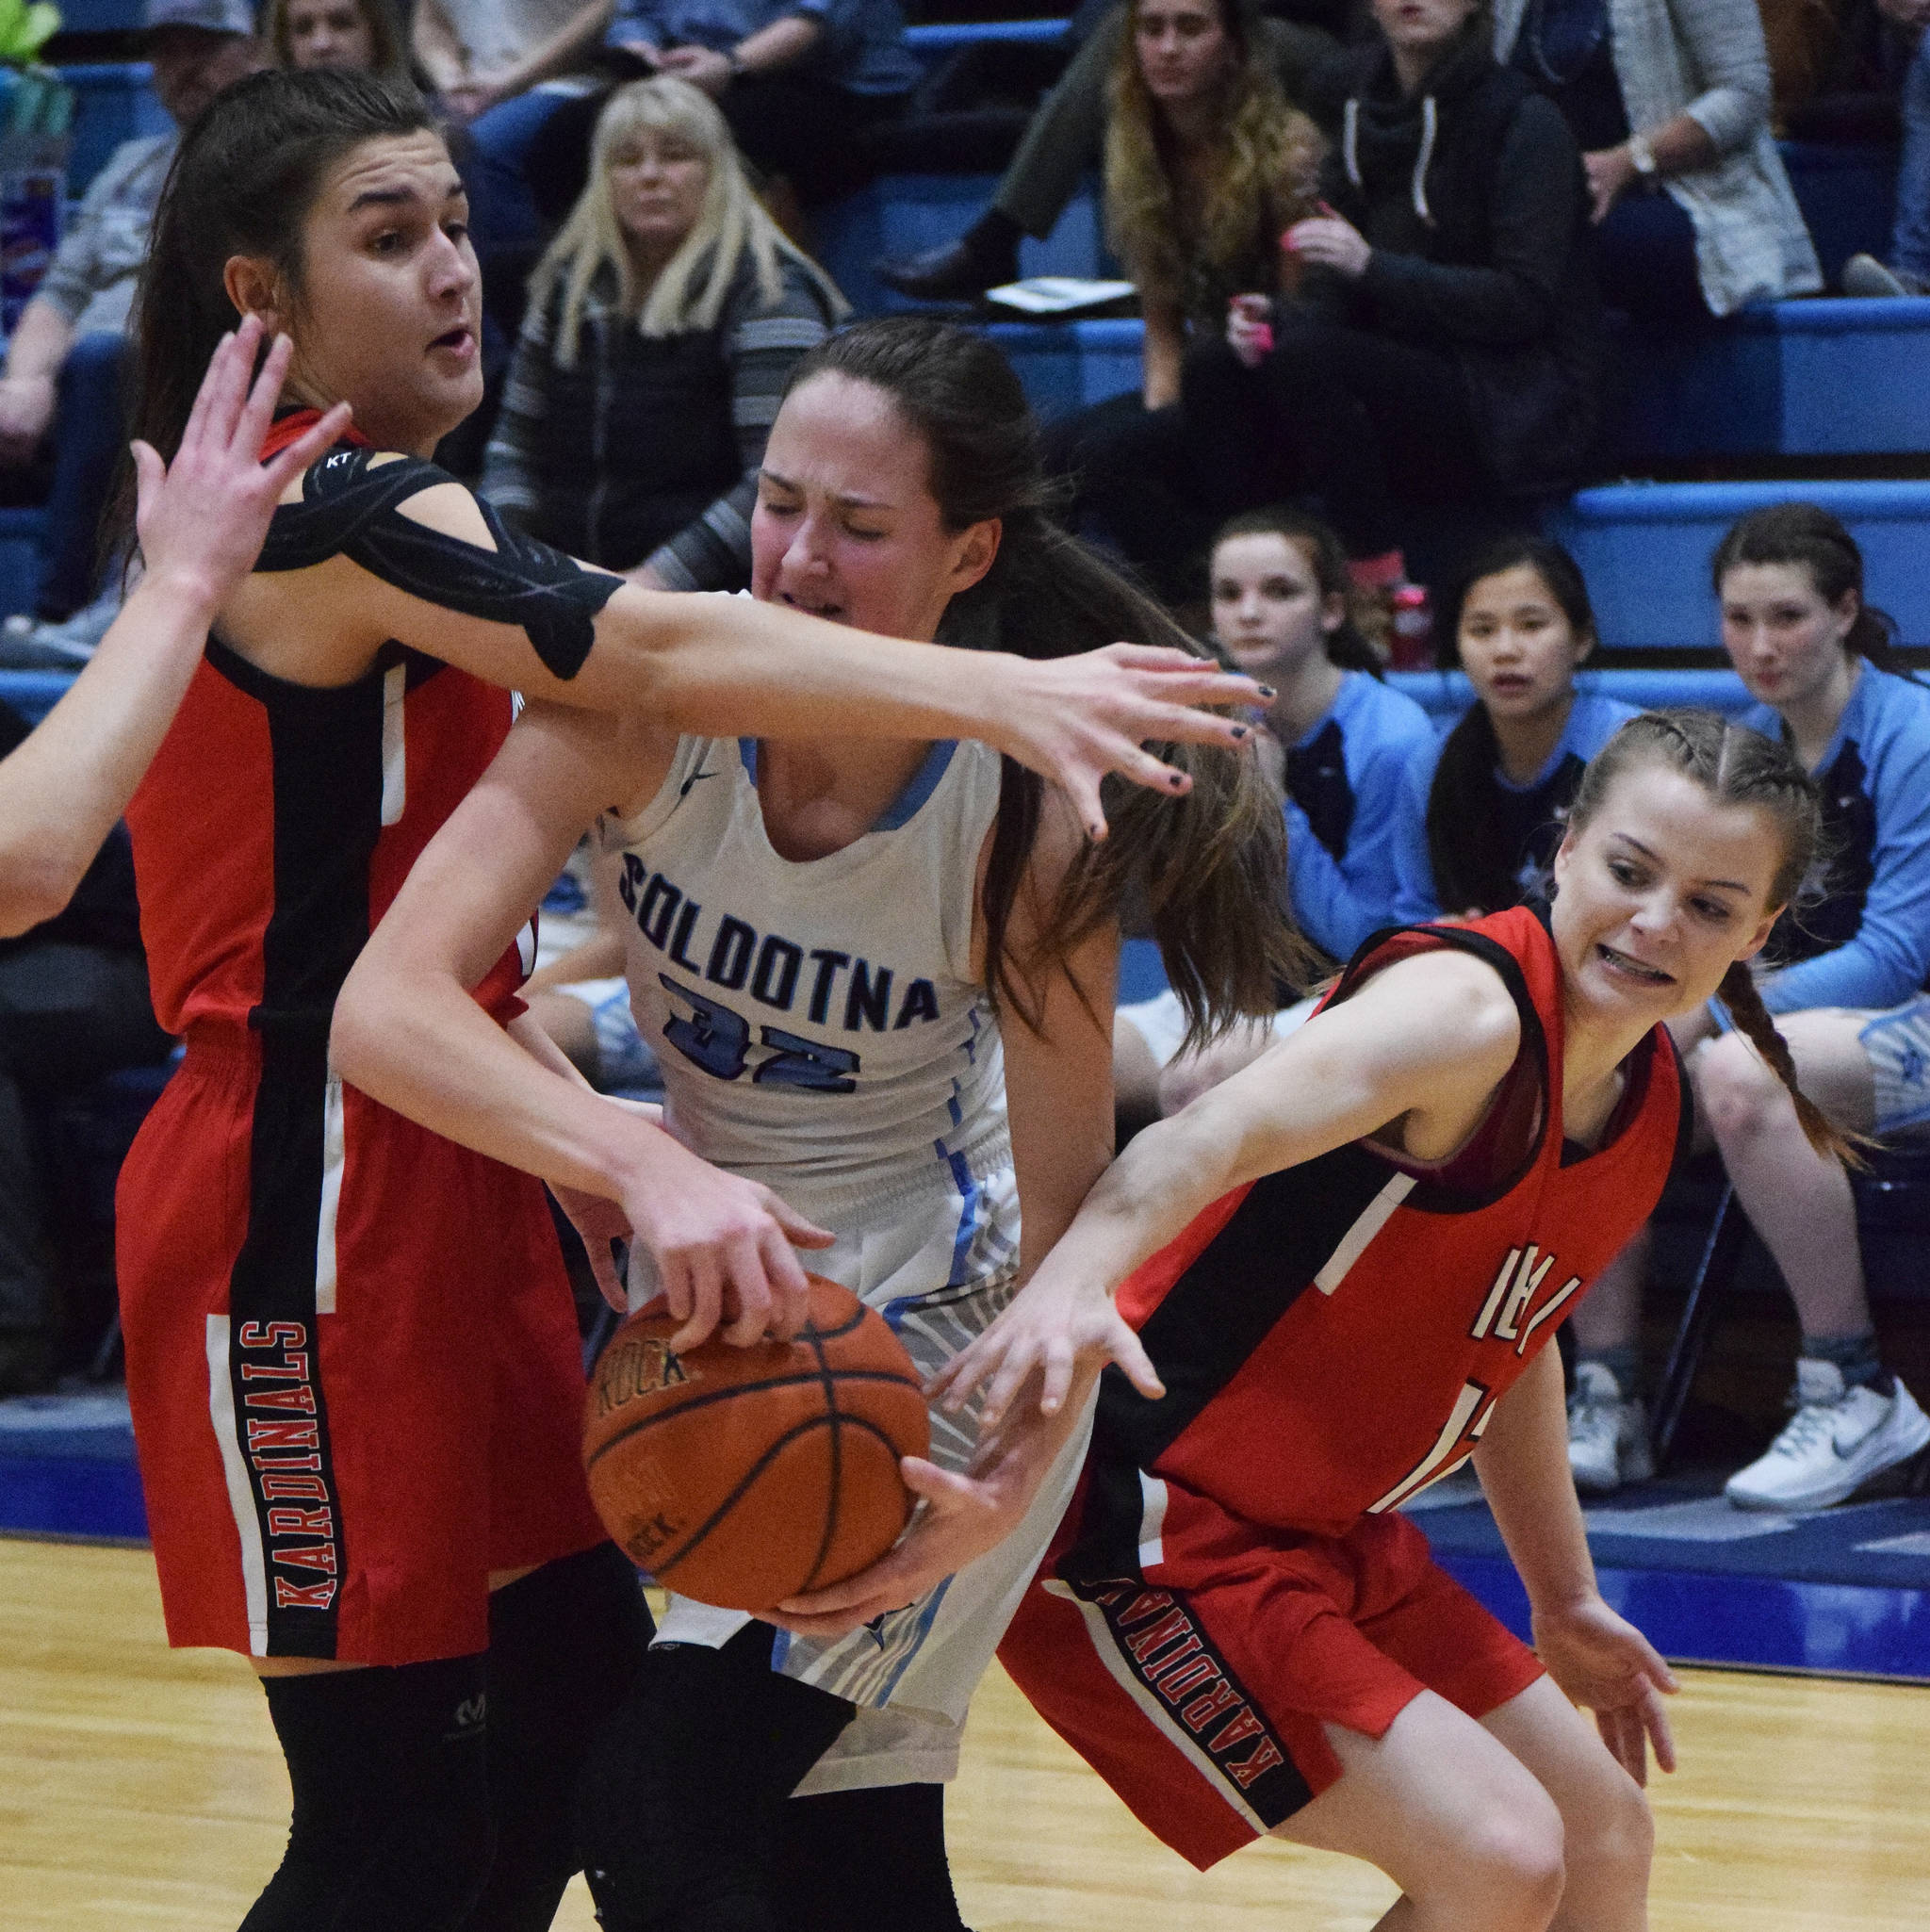 Soldotna’s Danica Schmidt tries to fight out from a trap between Kenai teammates Maddie Galloway (left) and Hayley Maw Tuesday in a nonconference contest at Soldotna High School. (Photo by Joey Klecka/Peninsula Clarion)